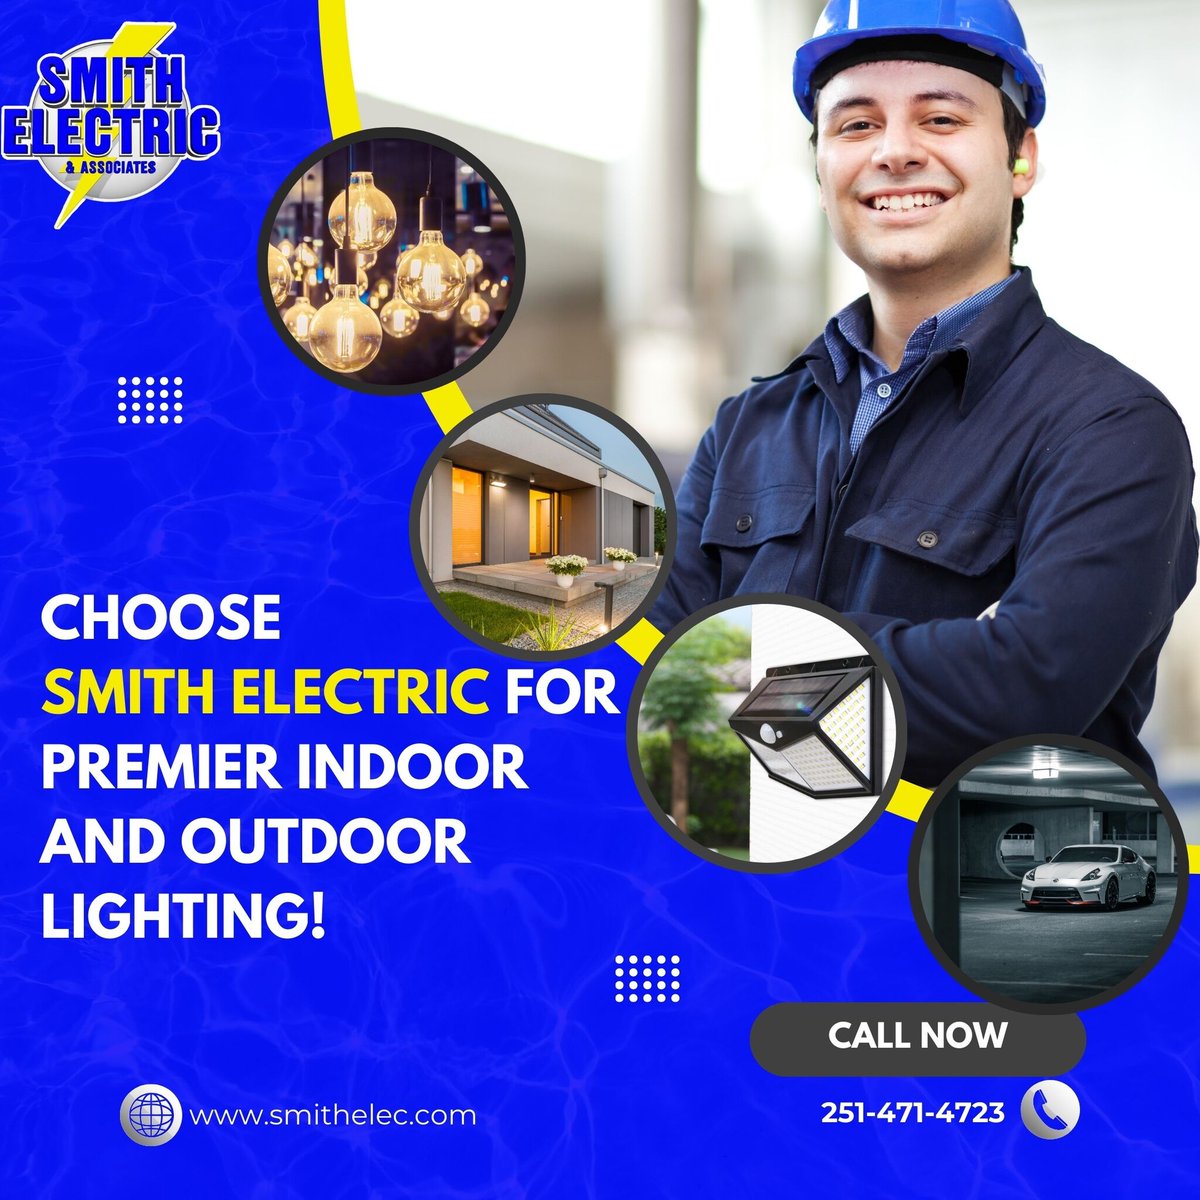 Illuminate your space with Smith Electric's indoor and outdoor lighting services. From motion lights to parking lot lighting, we've got the expertise to brighten up any area. Contact us for a consultation! #LightingExperts #BrightIdeas